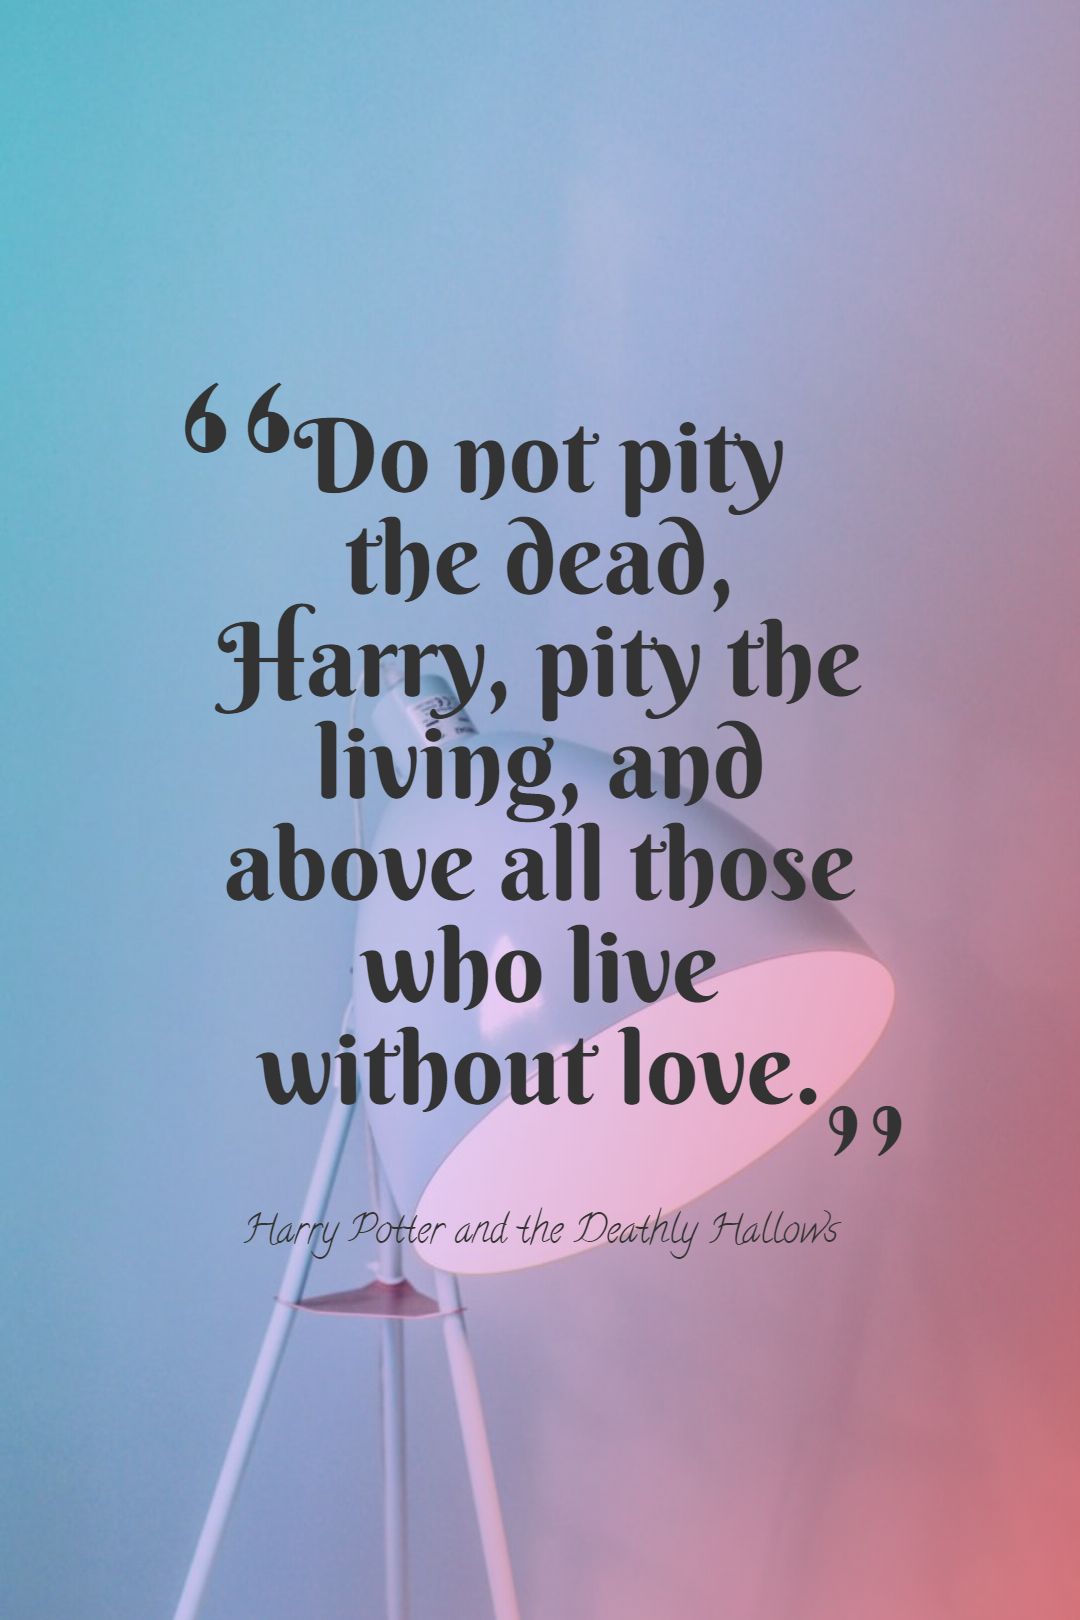 Do not pity the dead Harry pity the living and above all those who live without love.